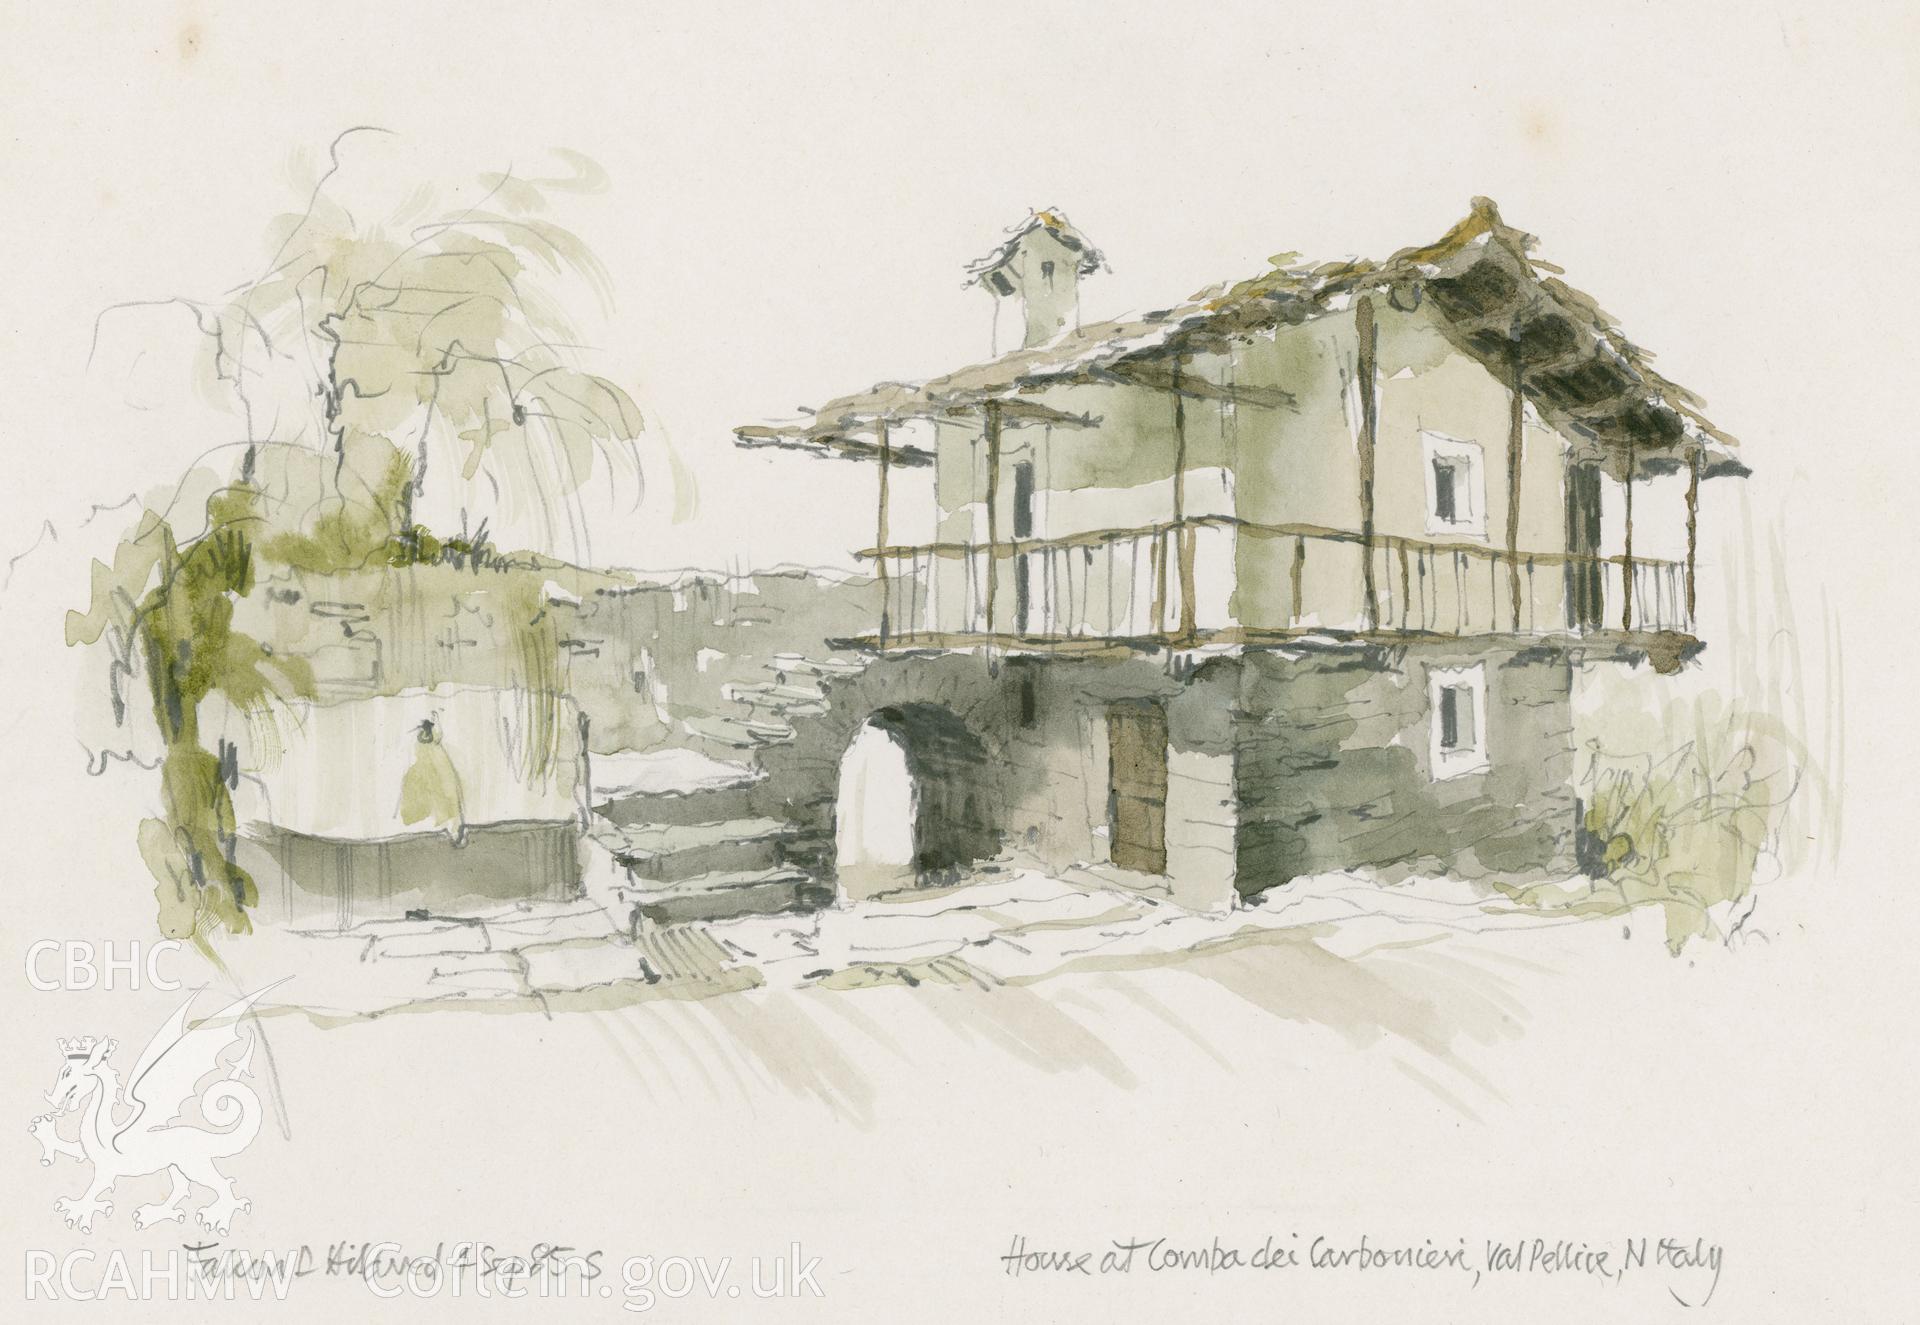 House at Cambria dei Carbonieri, Italy - View Towards Arch: (pencil and watercolour) drawing.